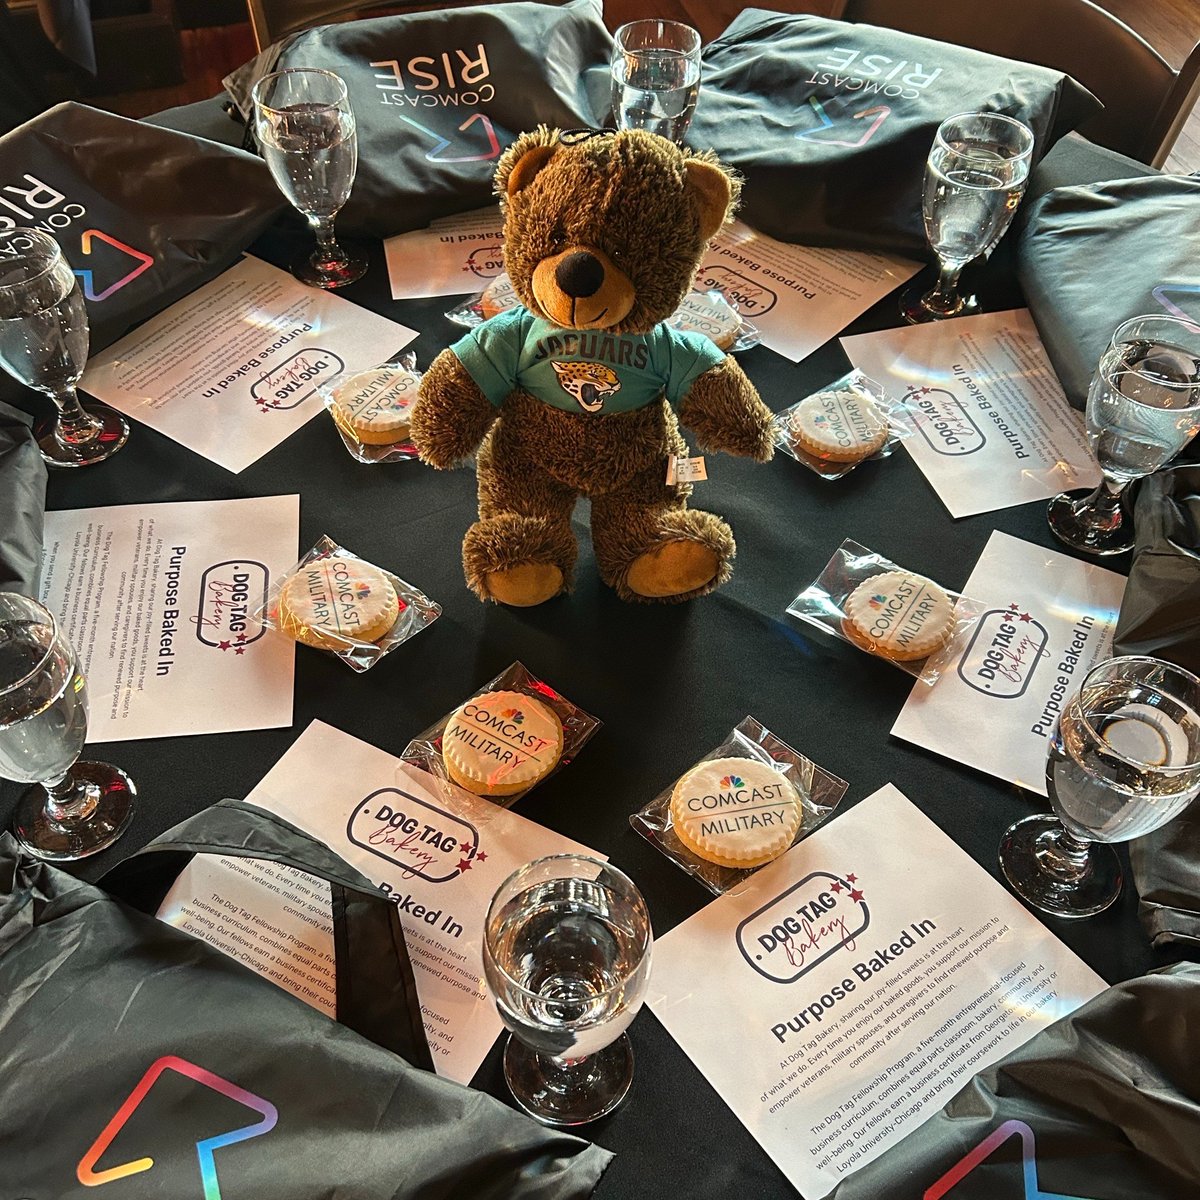 Our Dog Tag cookies took a trip down to Jacksonville, FL to the @comcast #RISE event, with a special appearance by the @jaguars bear to support diverse entrepreneurs, and veteran-owned businesses. We’re proud to work with partners that lift up military families and communities.